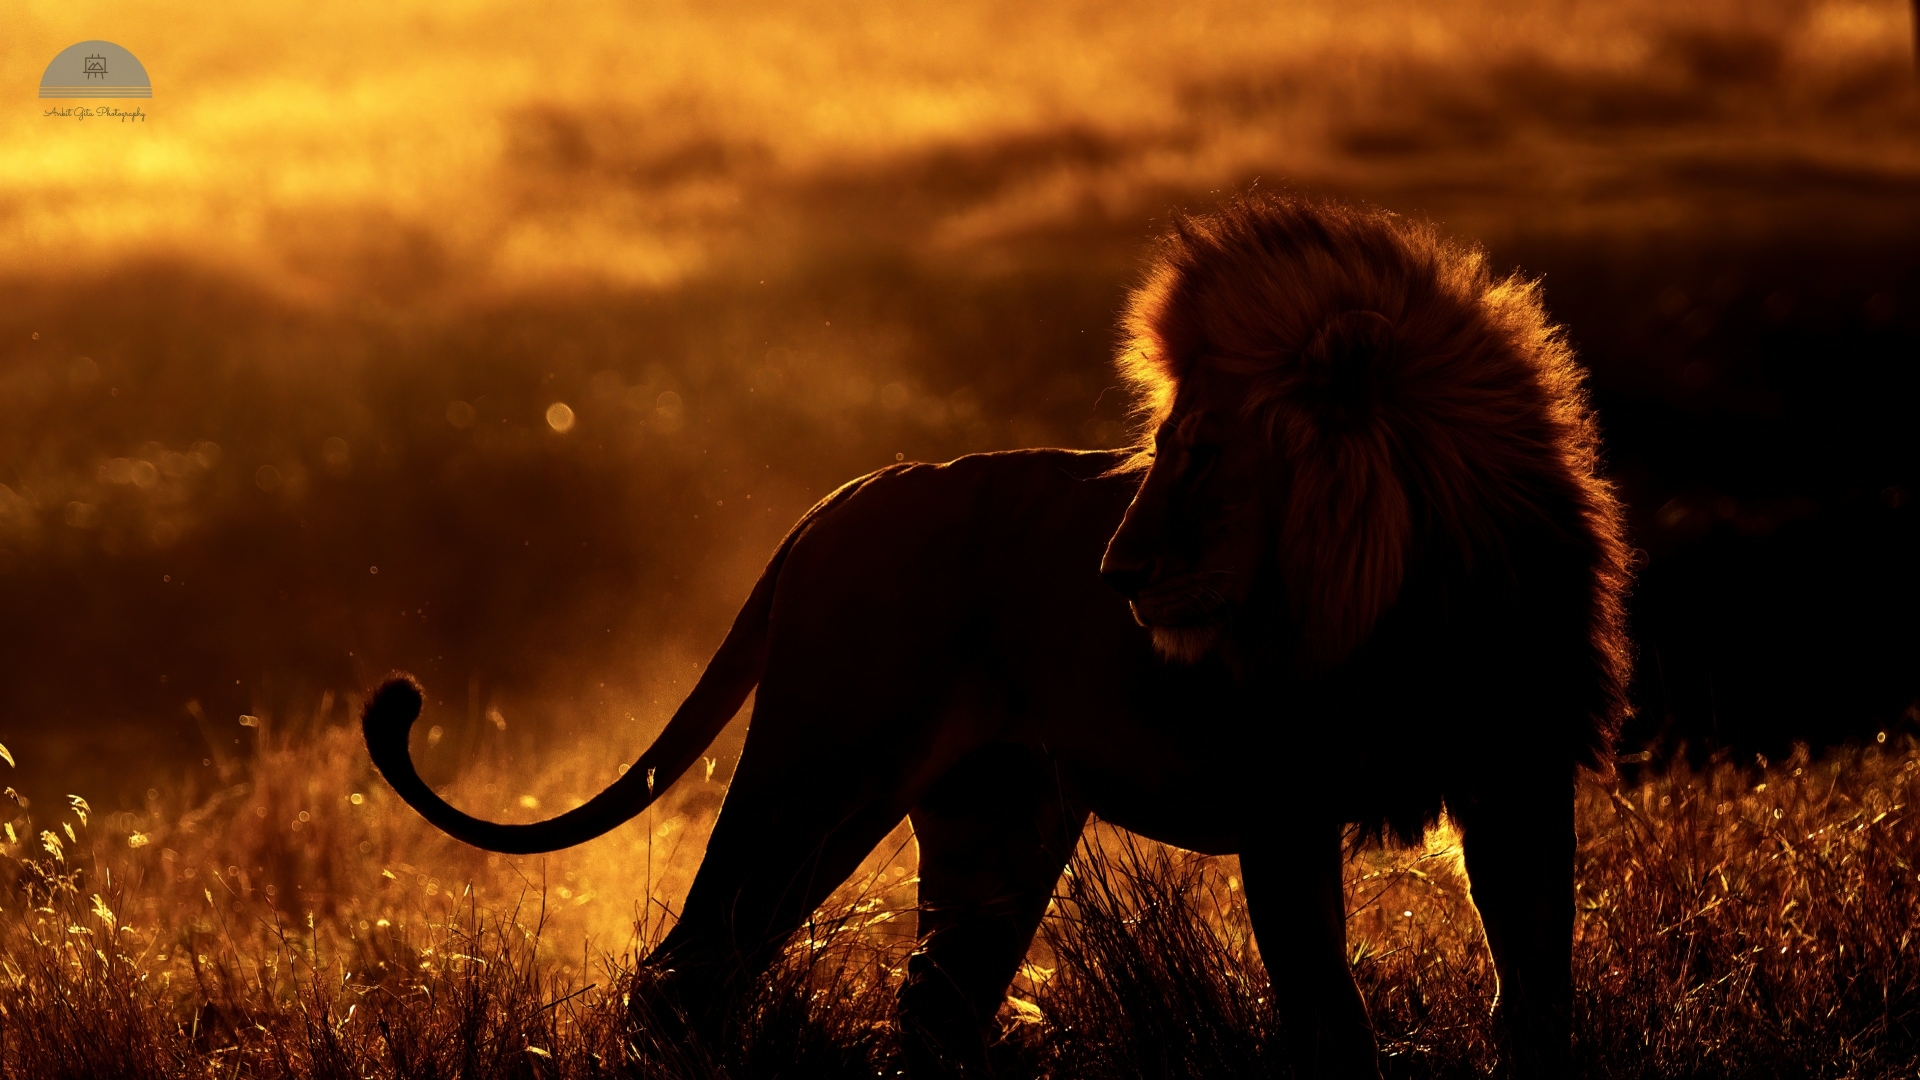 Lion iPhone  Android iPhone Desktop HD Backgrounds  Wallpapers 1080p  4k 124816 hdwallpapers androidwal  Lion hd wallpaper Lion images Lion  wallpaper